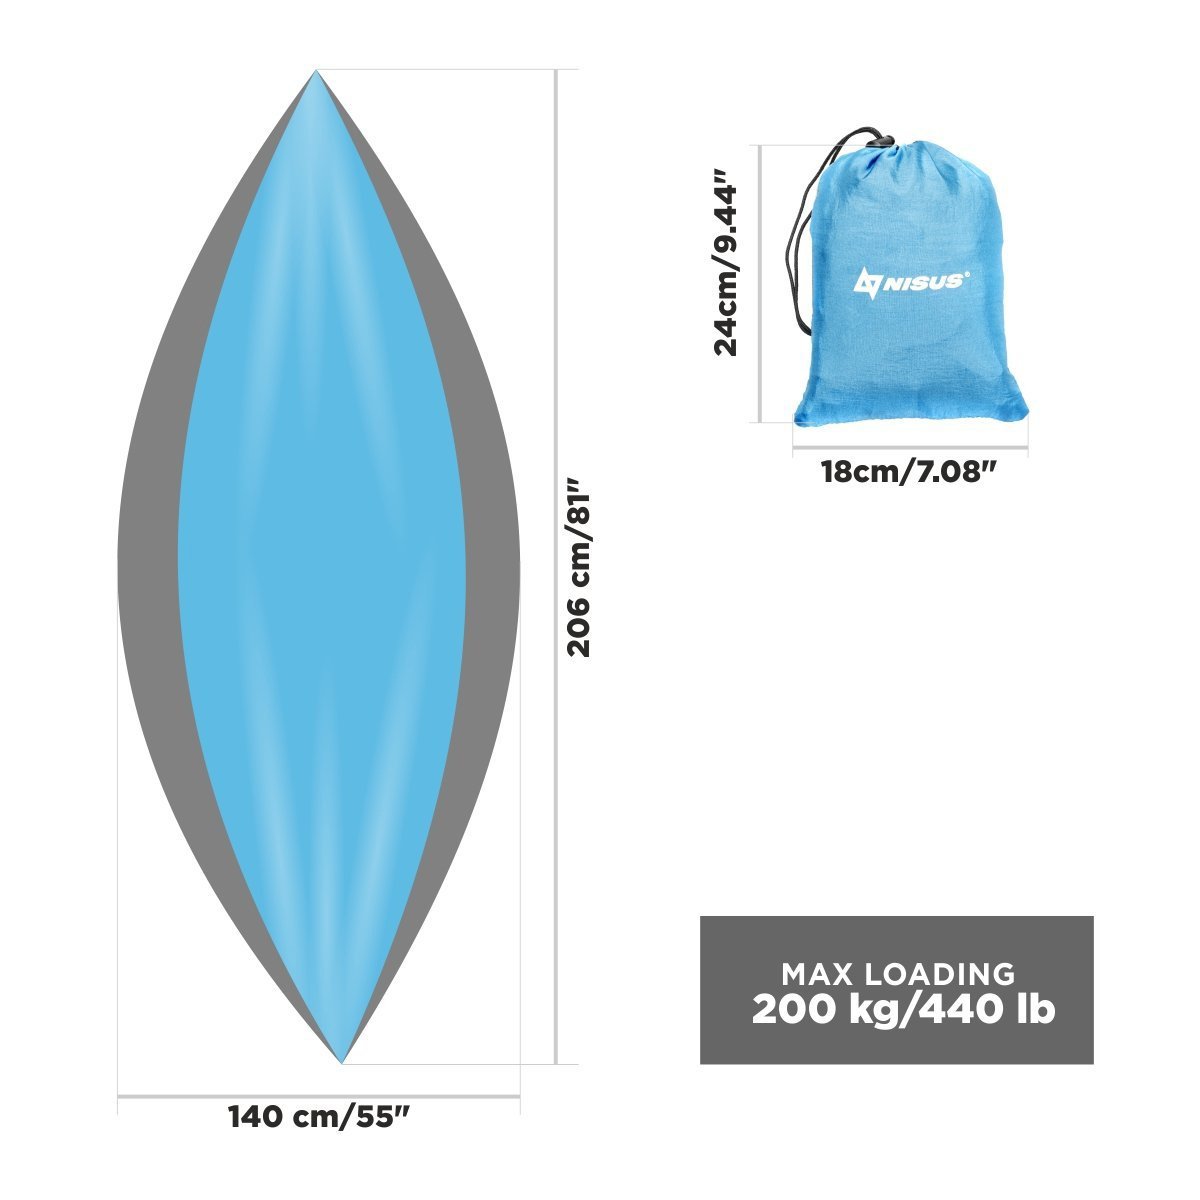 Blue camping hammock with a carry bag dimensions